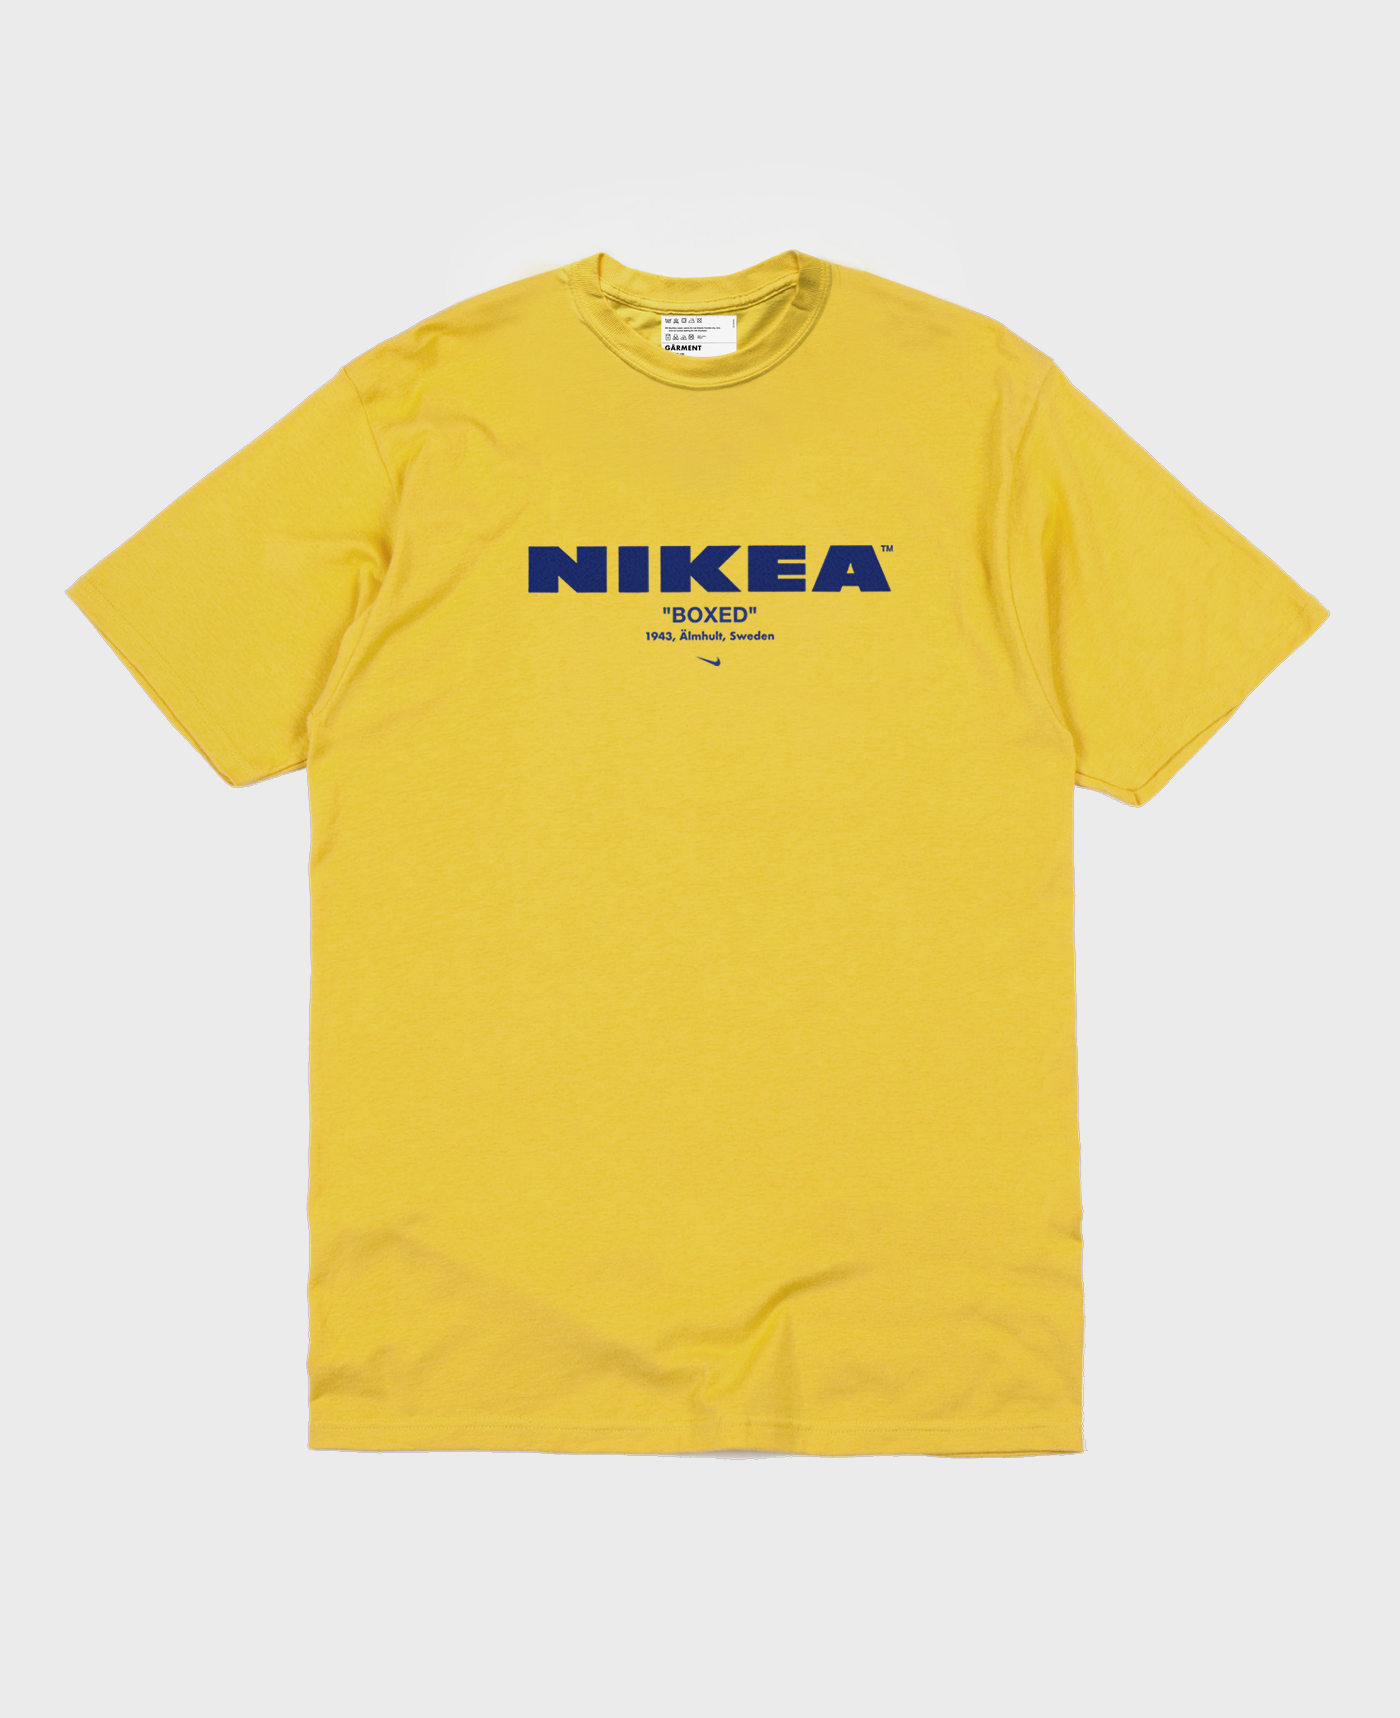 nike design your own shirt